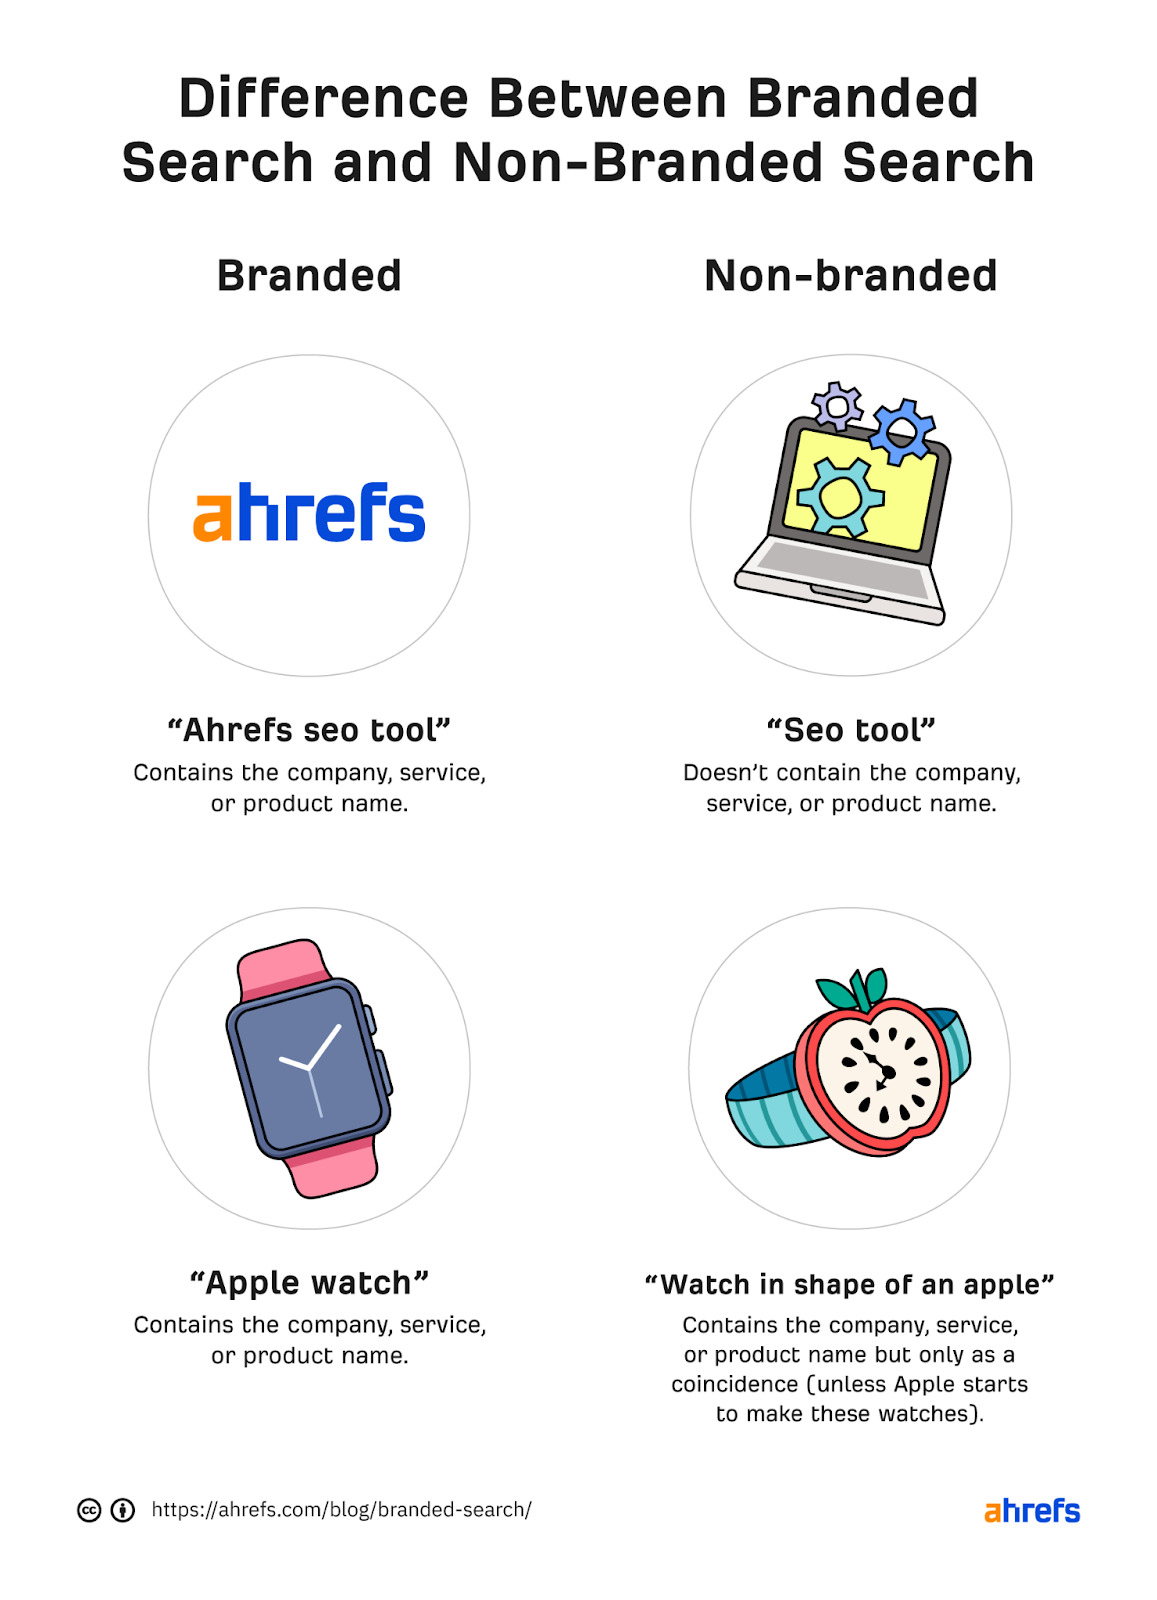 Infographic on difference between branded and non-branded searches